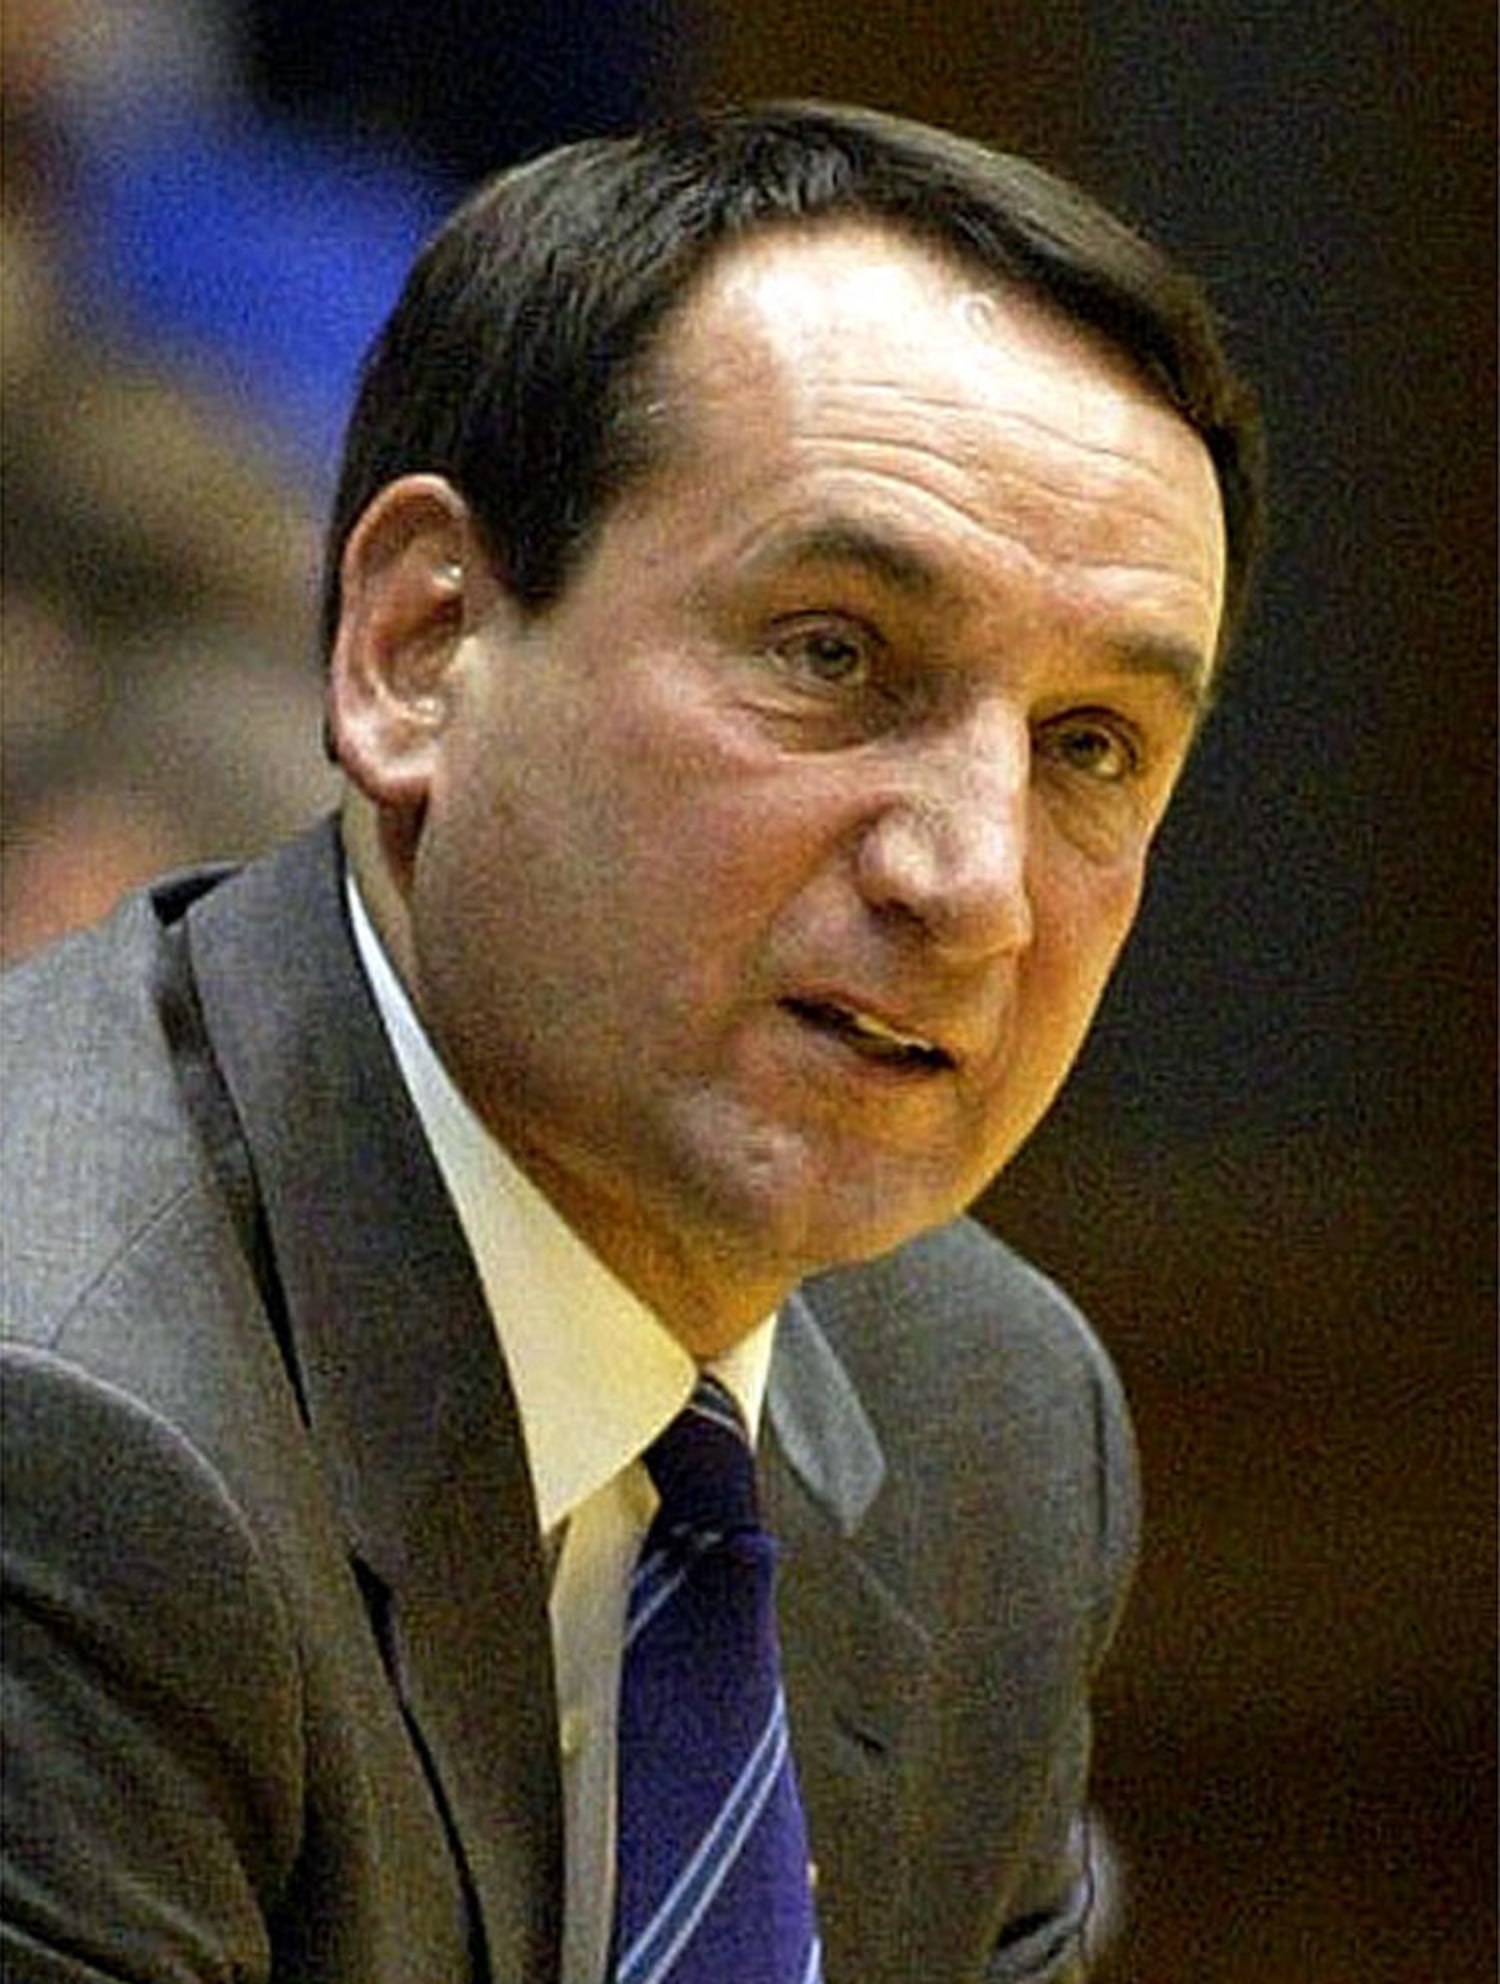 Coach K happyhe's not with Lakers